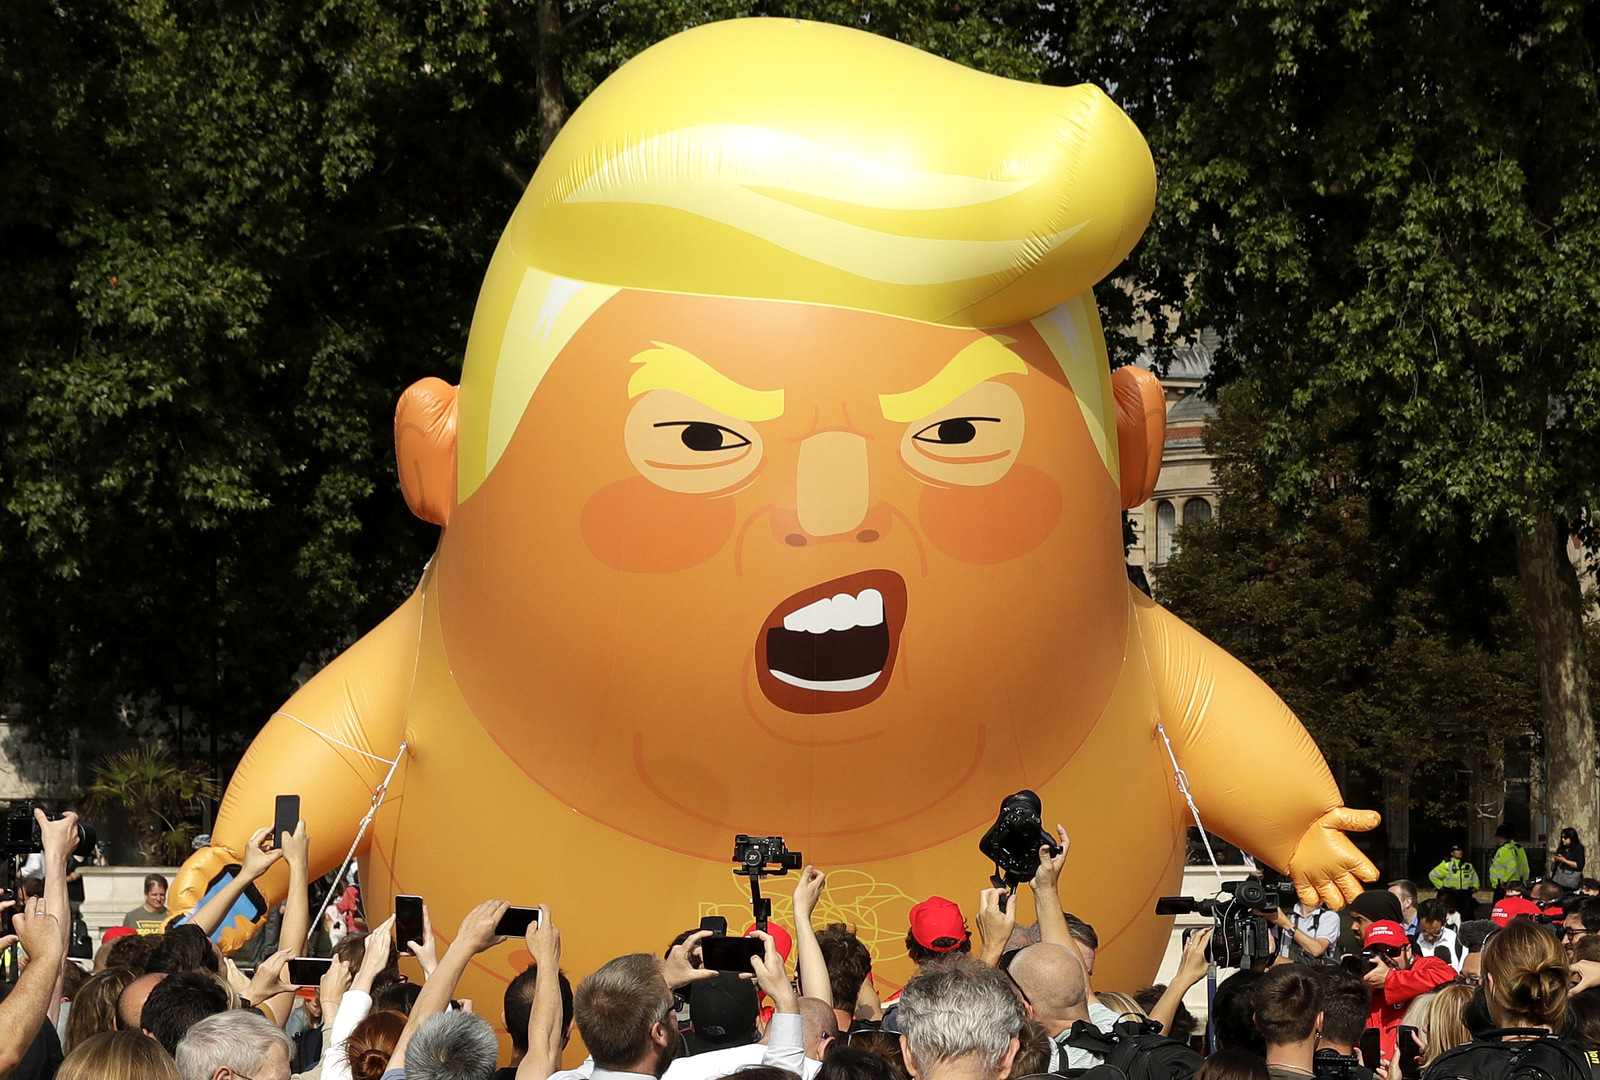 A six-meter high cartoon baby blimp of U.S. President Donald Trump is flown as a protest against his visit, in Parliament Square in London, England, July 13, 2018. Matt Dunham | AP